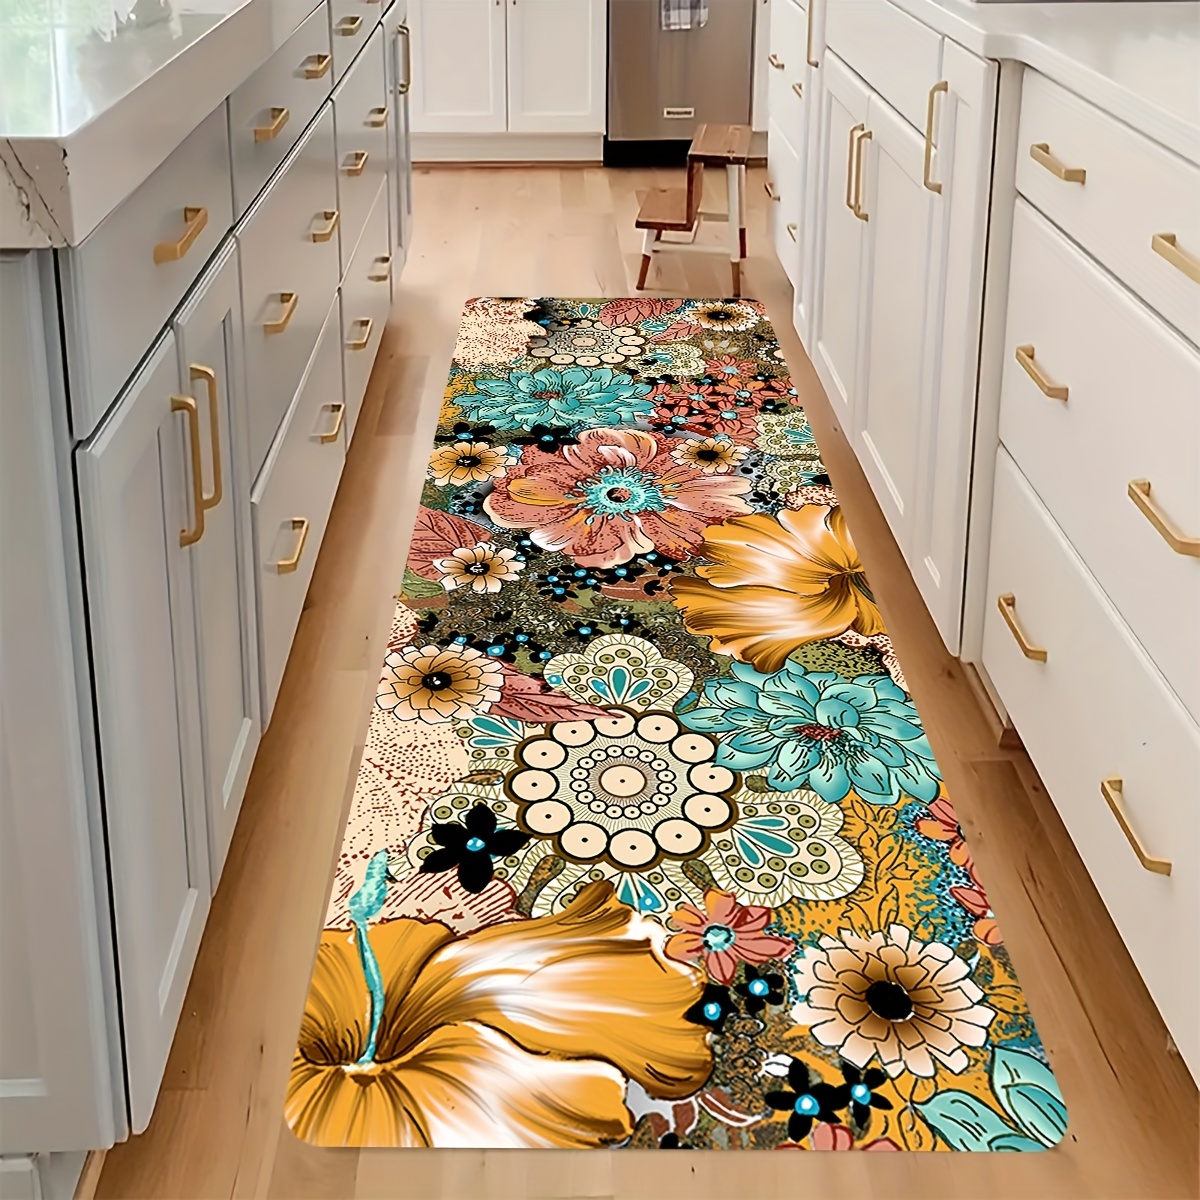 Tyrot Boho Kitchen Mat Set of 2 Cushioned Anti-Fatigue Floor Mat PVC Rubber  Kitchen Rugs Non Slip Waterproof Damask Floral Kitchen Rugs and Mats